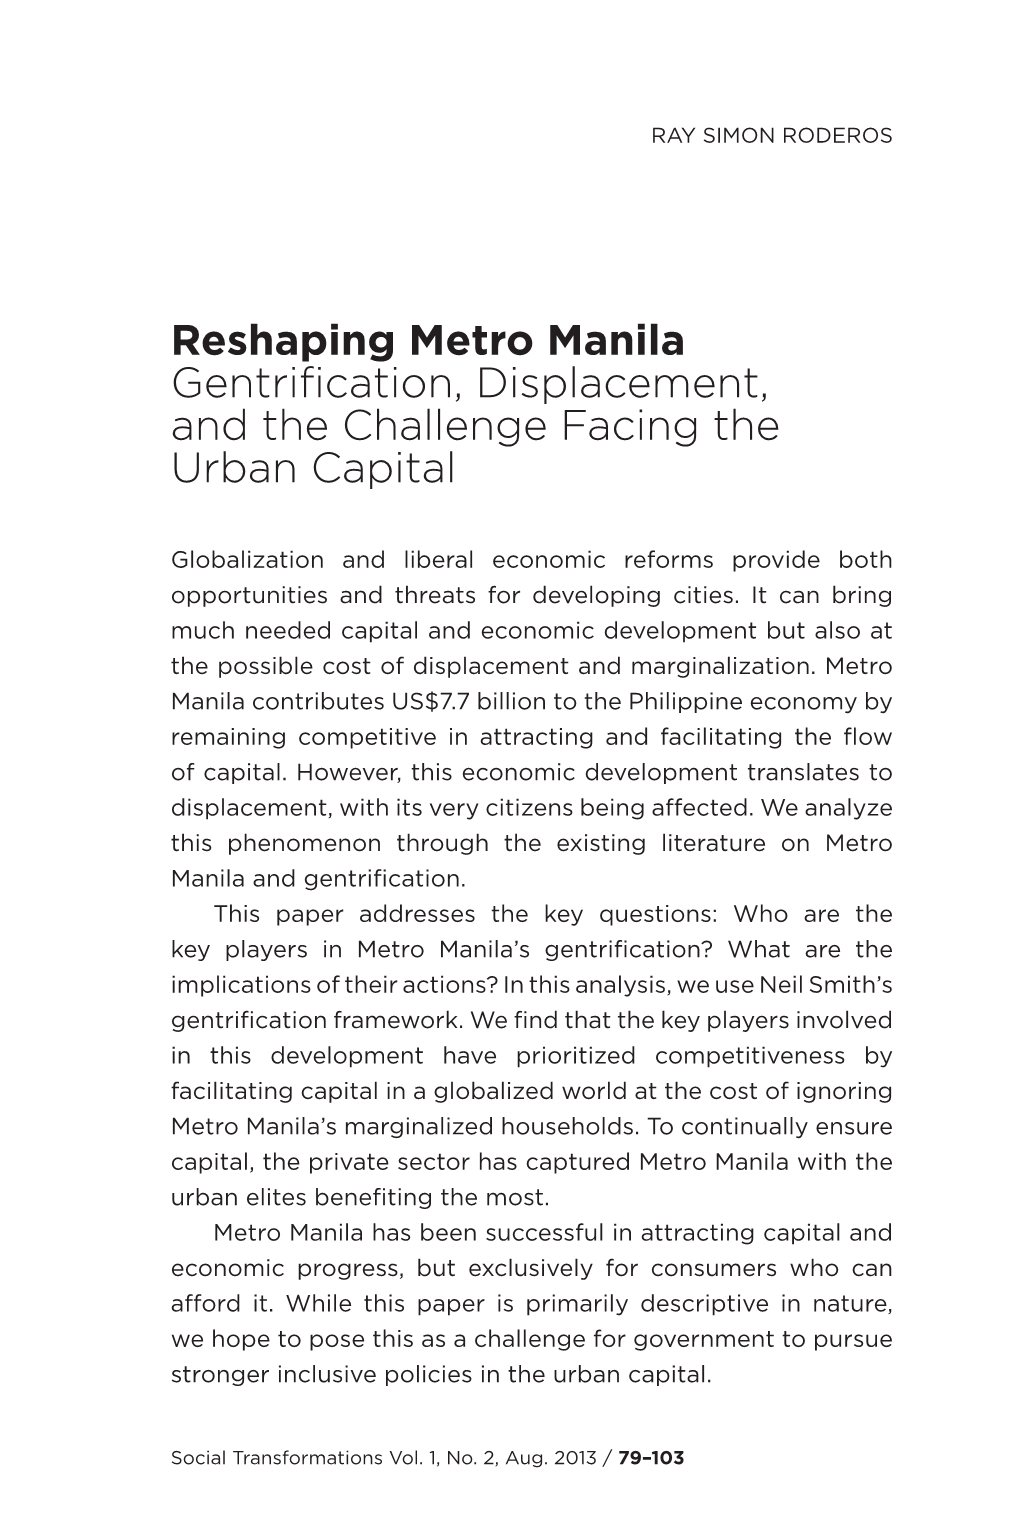 Reshaping Metro Manila Gentrification, Displacement, and the Challenge Facing the Urban Capital